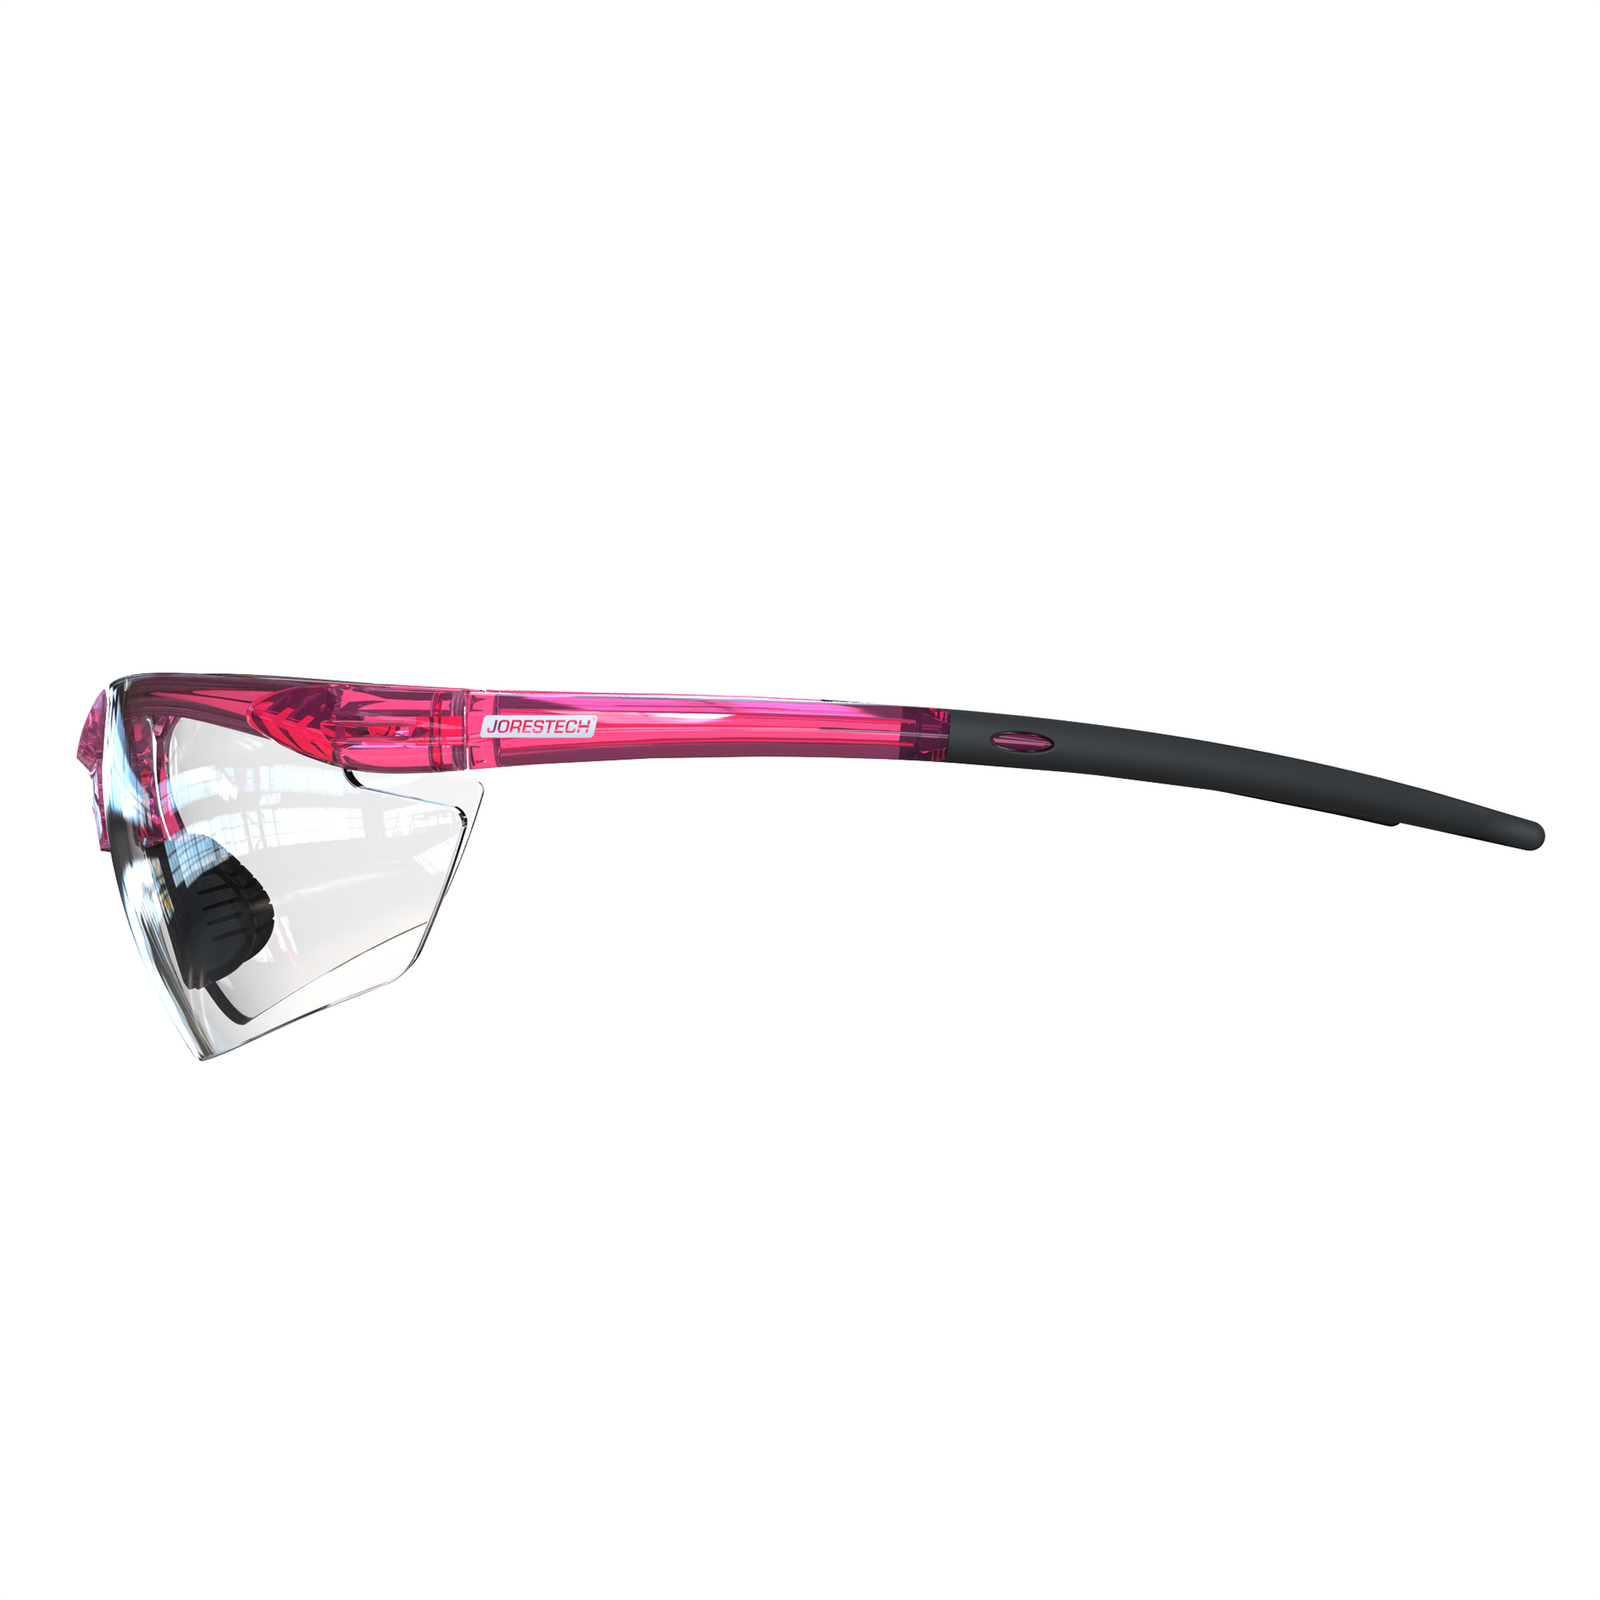 High impact polycarbonate safety glasses with flexible rubber temple with clear lenses and pink frame and temples